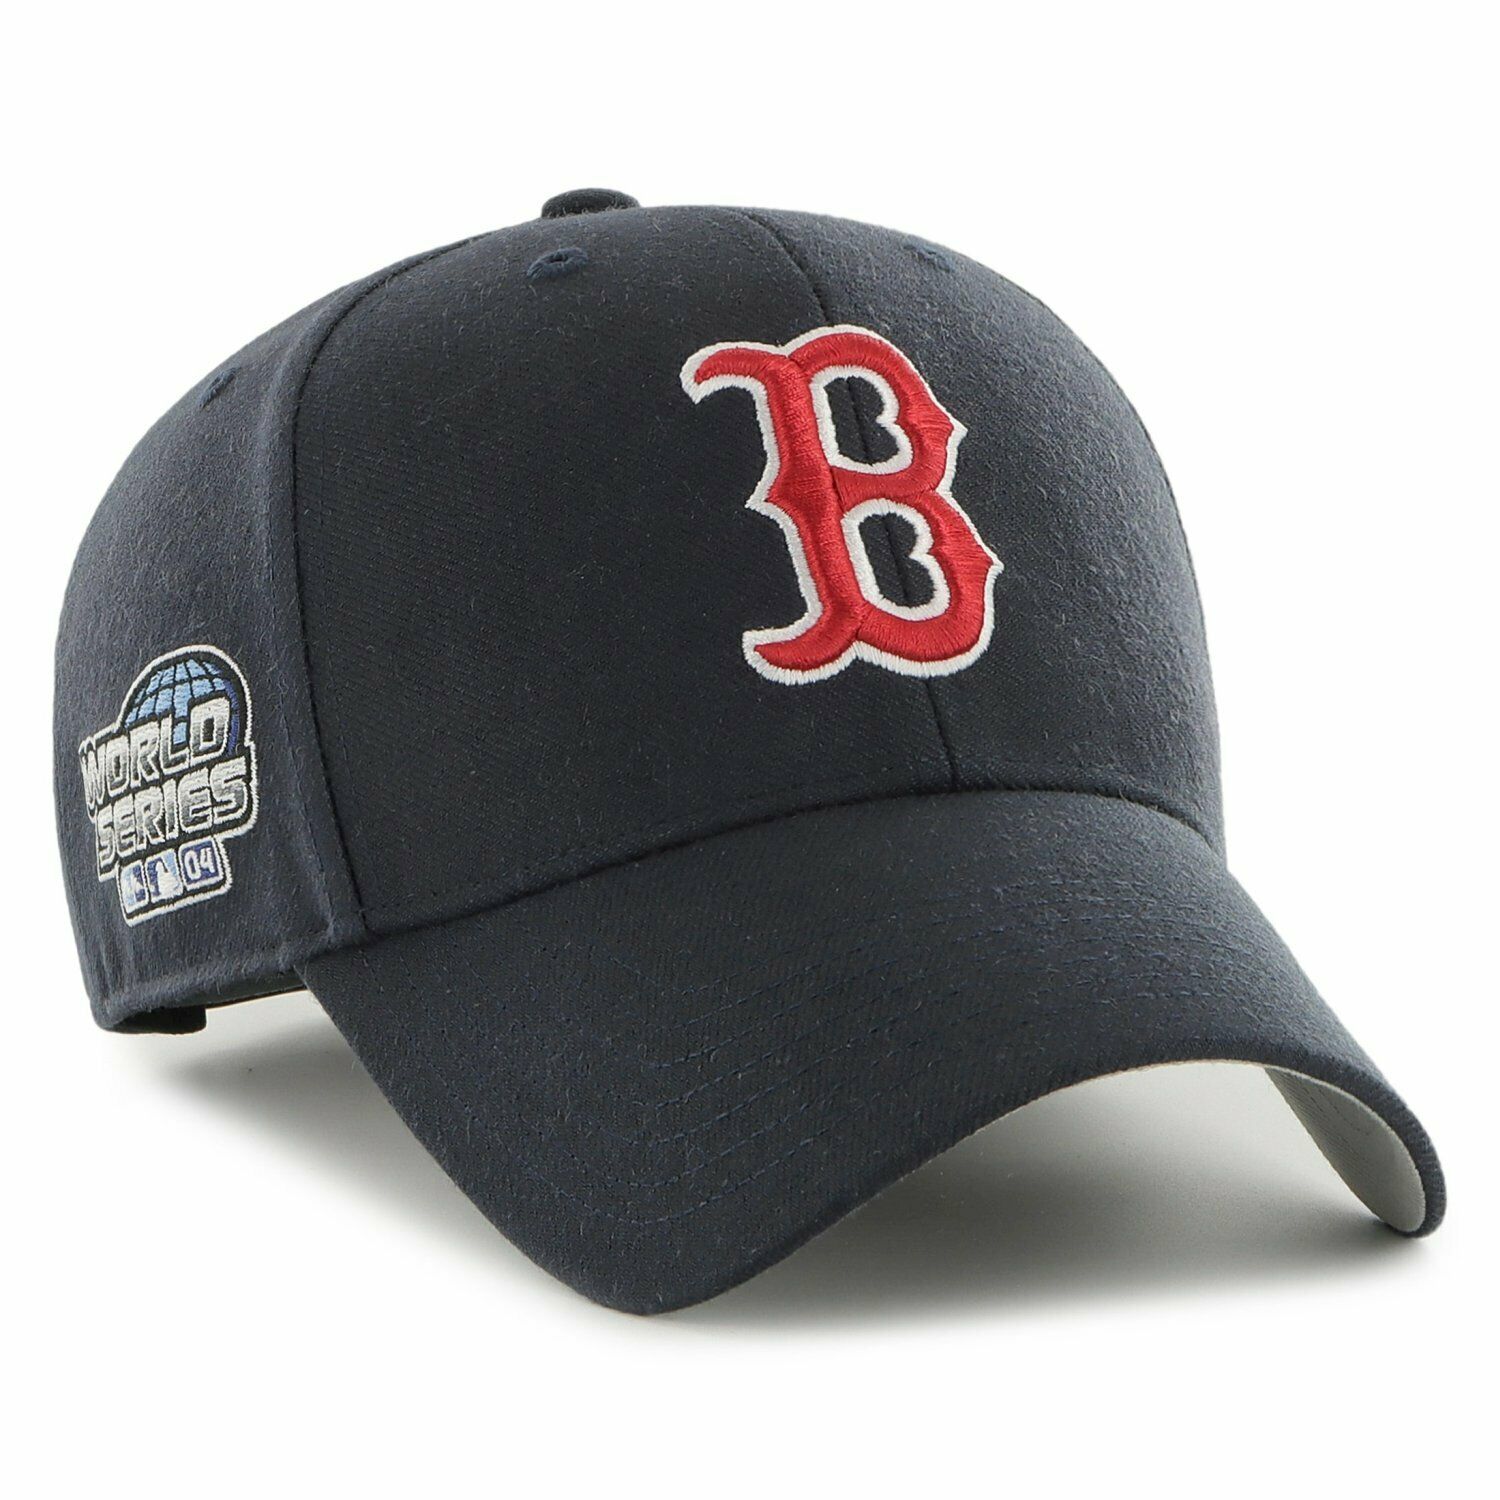 47 Boston Red Sox Hats in Boston Red Sox Team Shop 